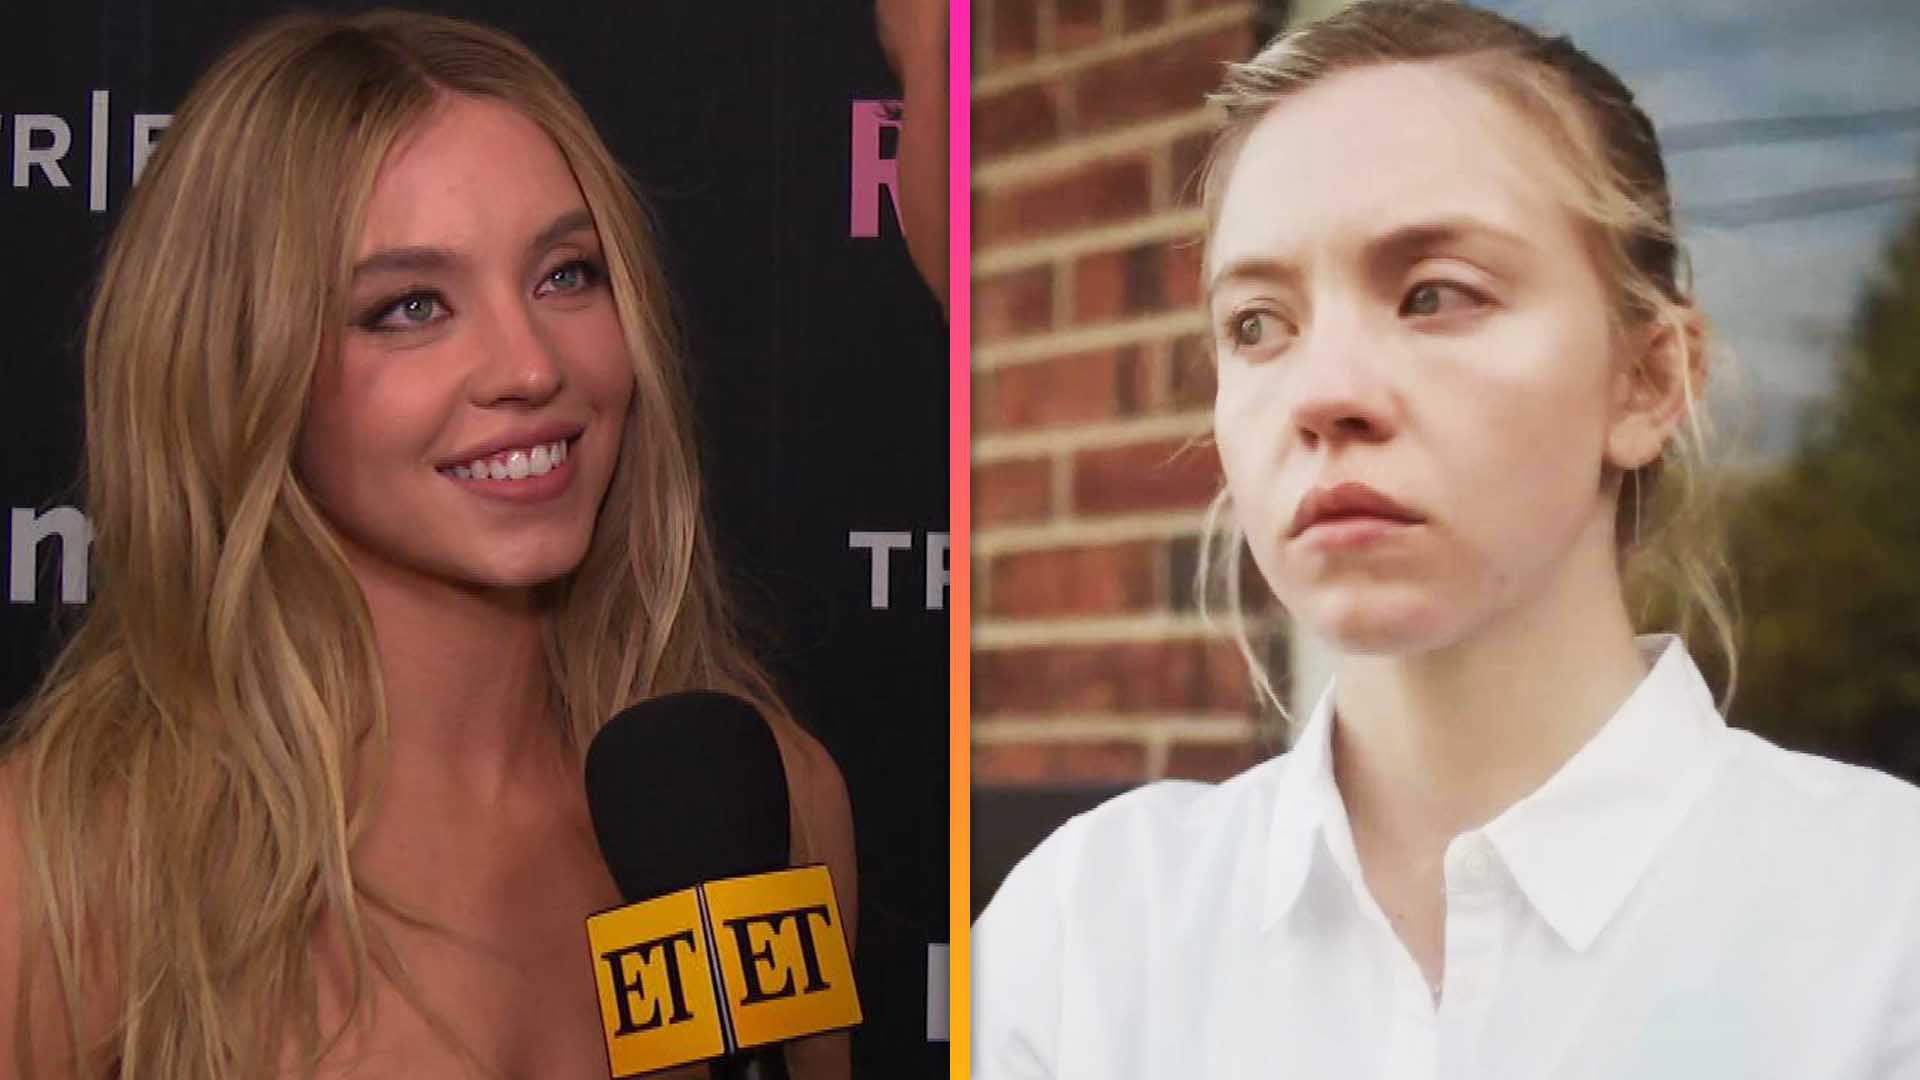 Sydney Sweeney Opens Up About Meeting the Real Reality Winner for New Film (Exclusive)